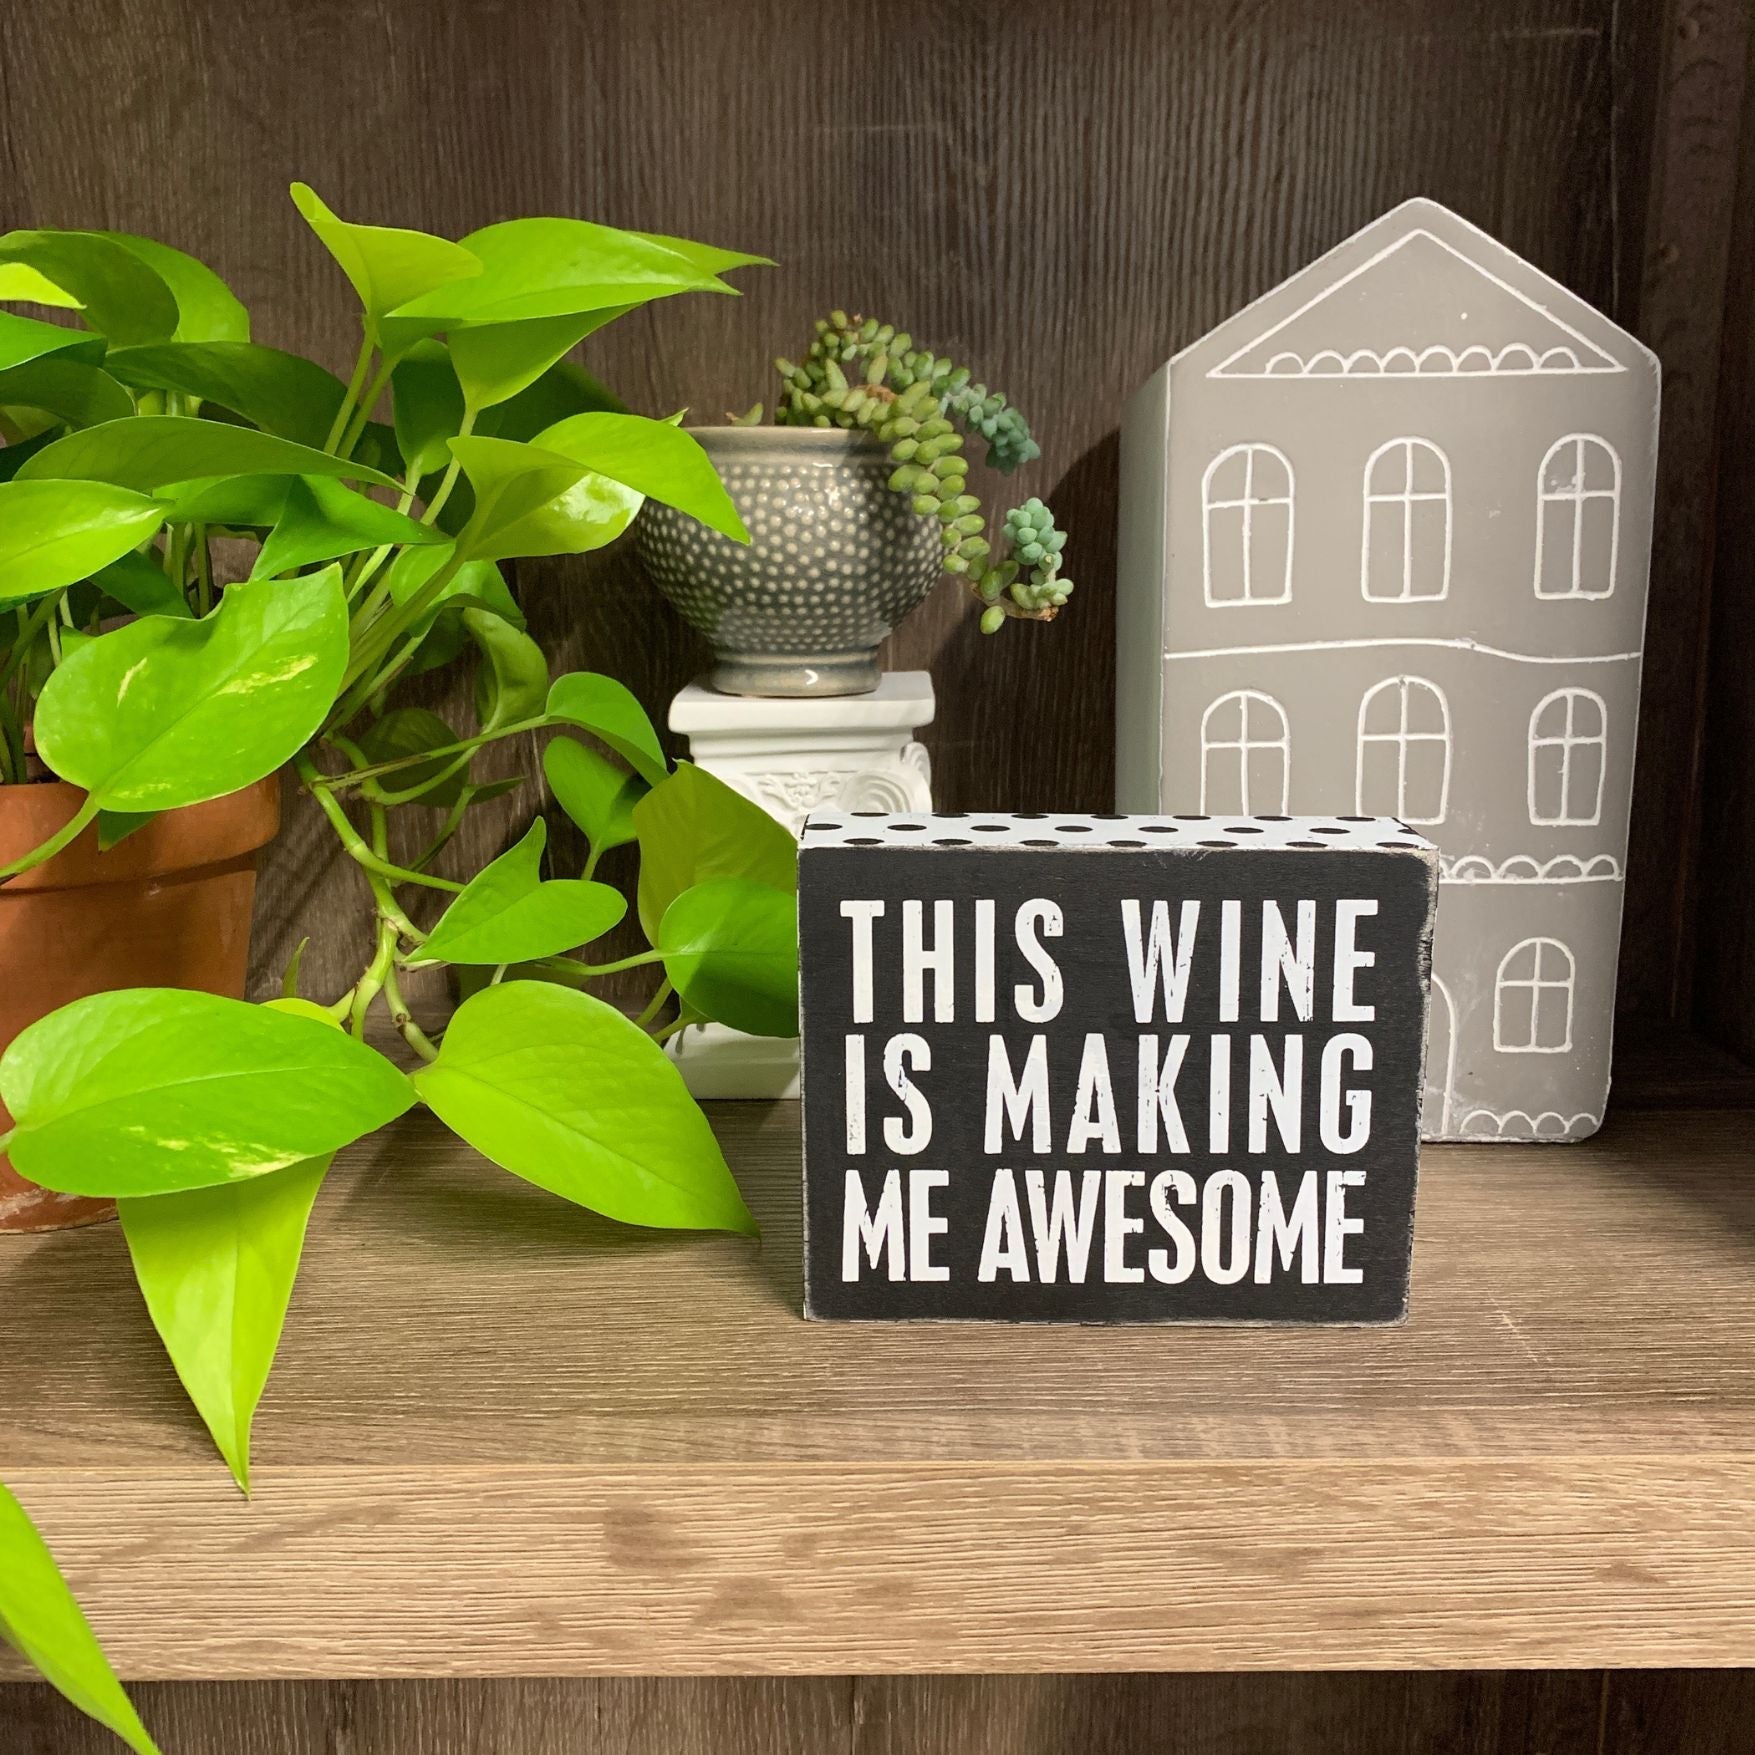 This Wine is Making Me Awesome Box Sign in Rustic Wood with White Lettering